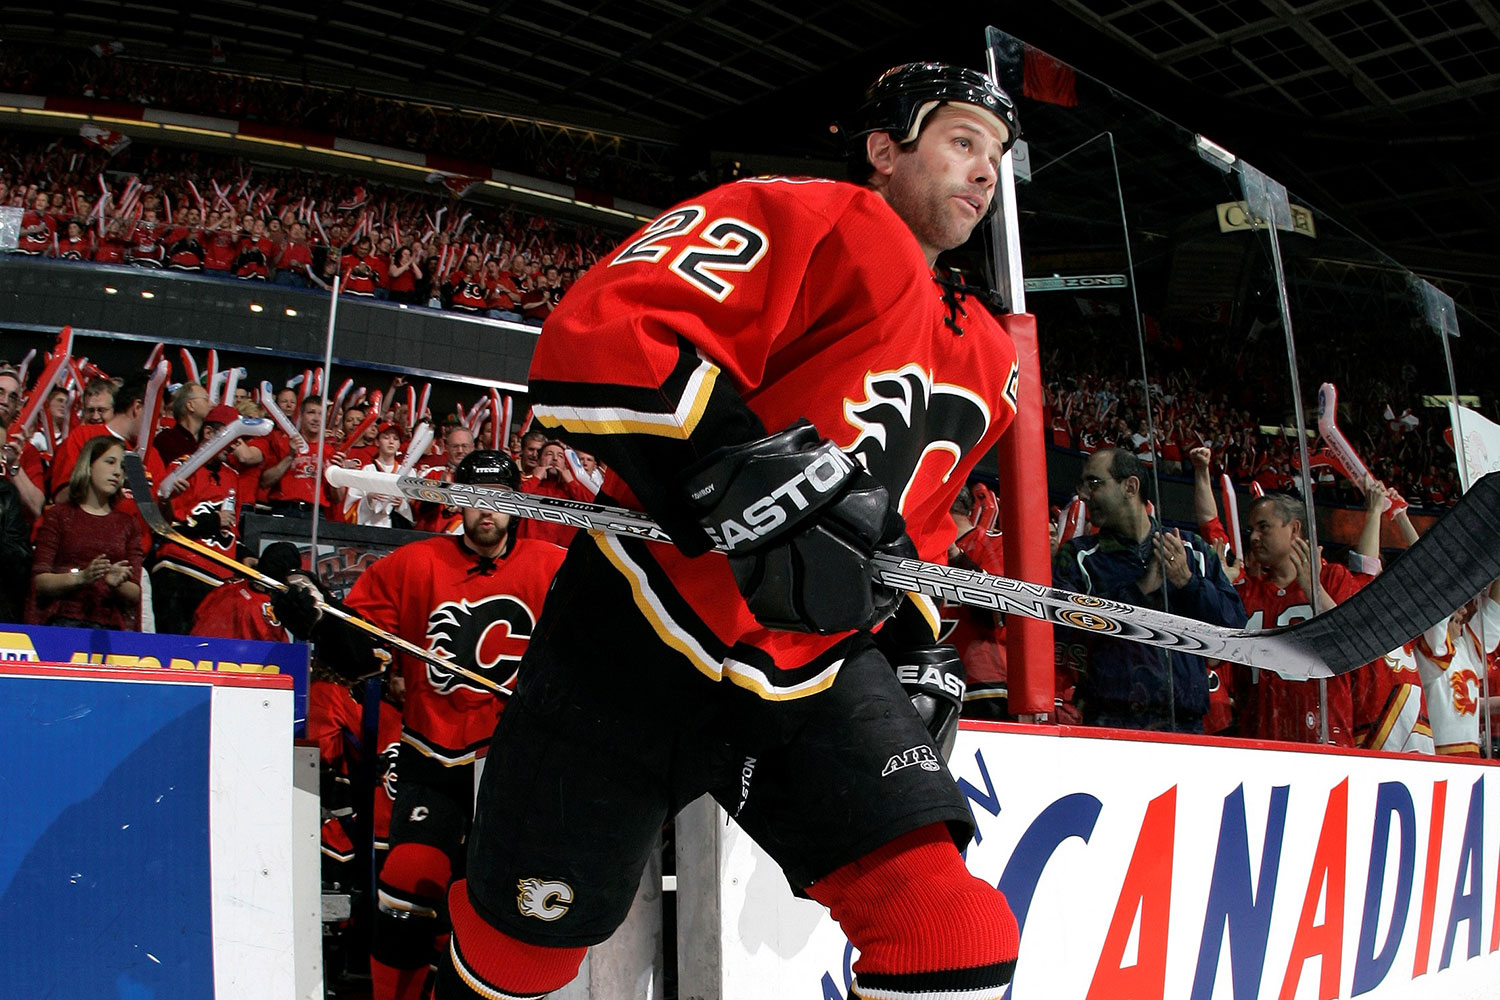 Flames Best #22 Of All Time: Craig Conroy - Matchsticks and Gasoline